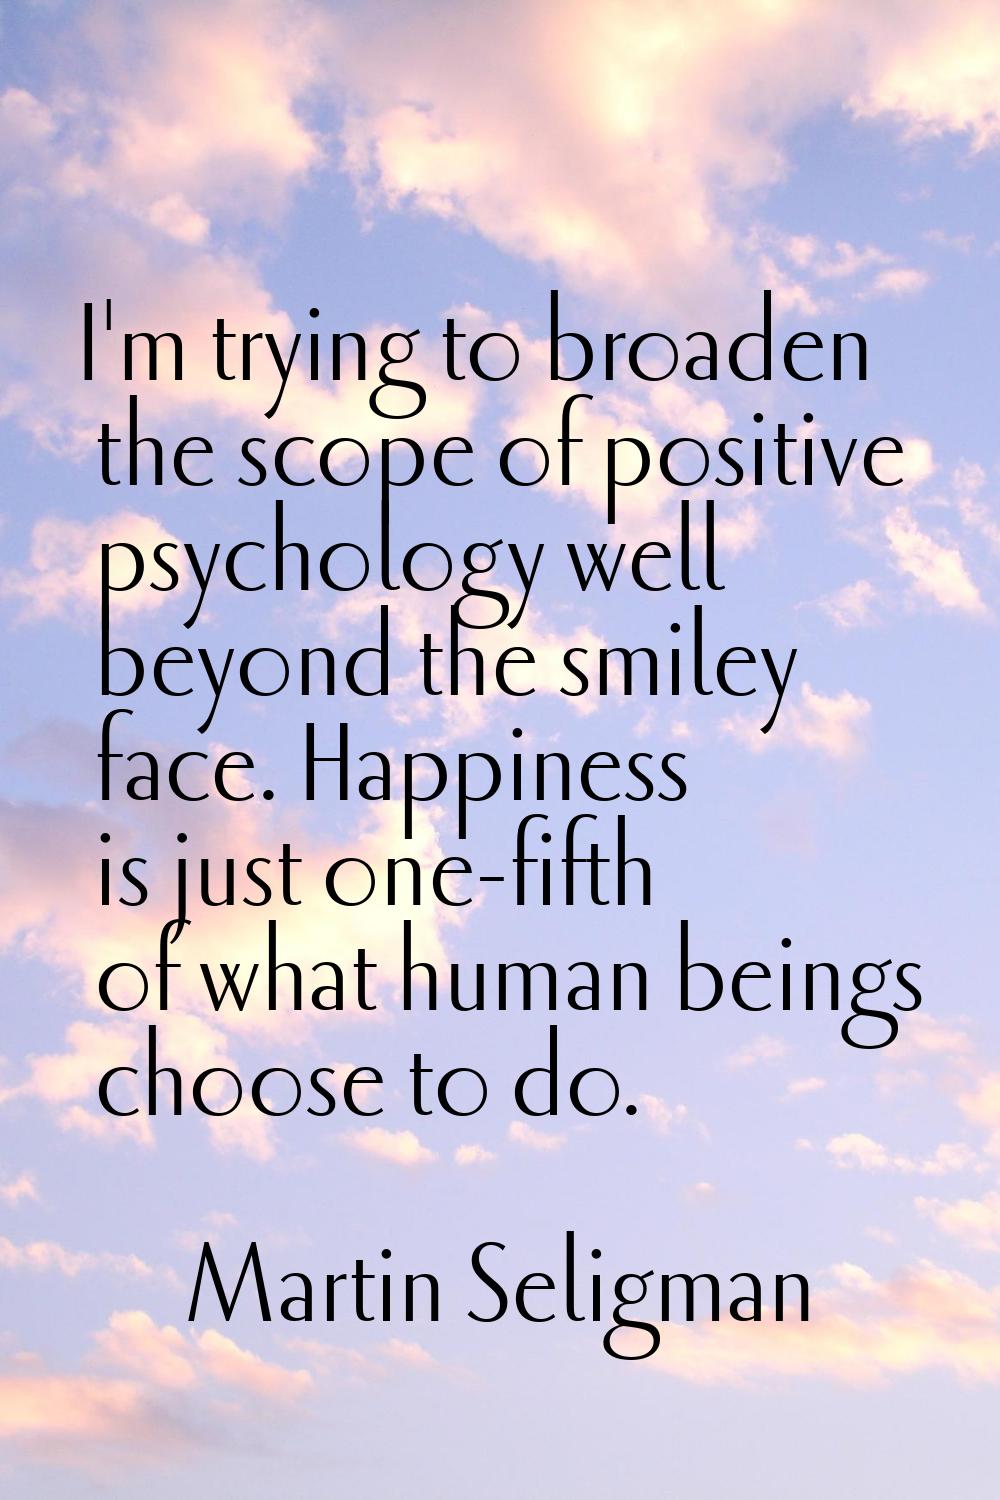 I'm trying to broaden the scope of positive psychology well beyond the smiley face. Happiness is ju